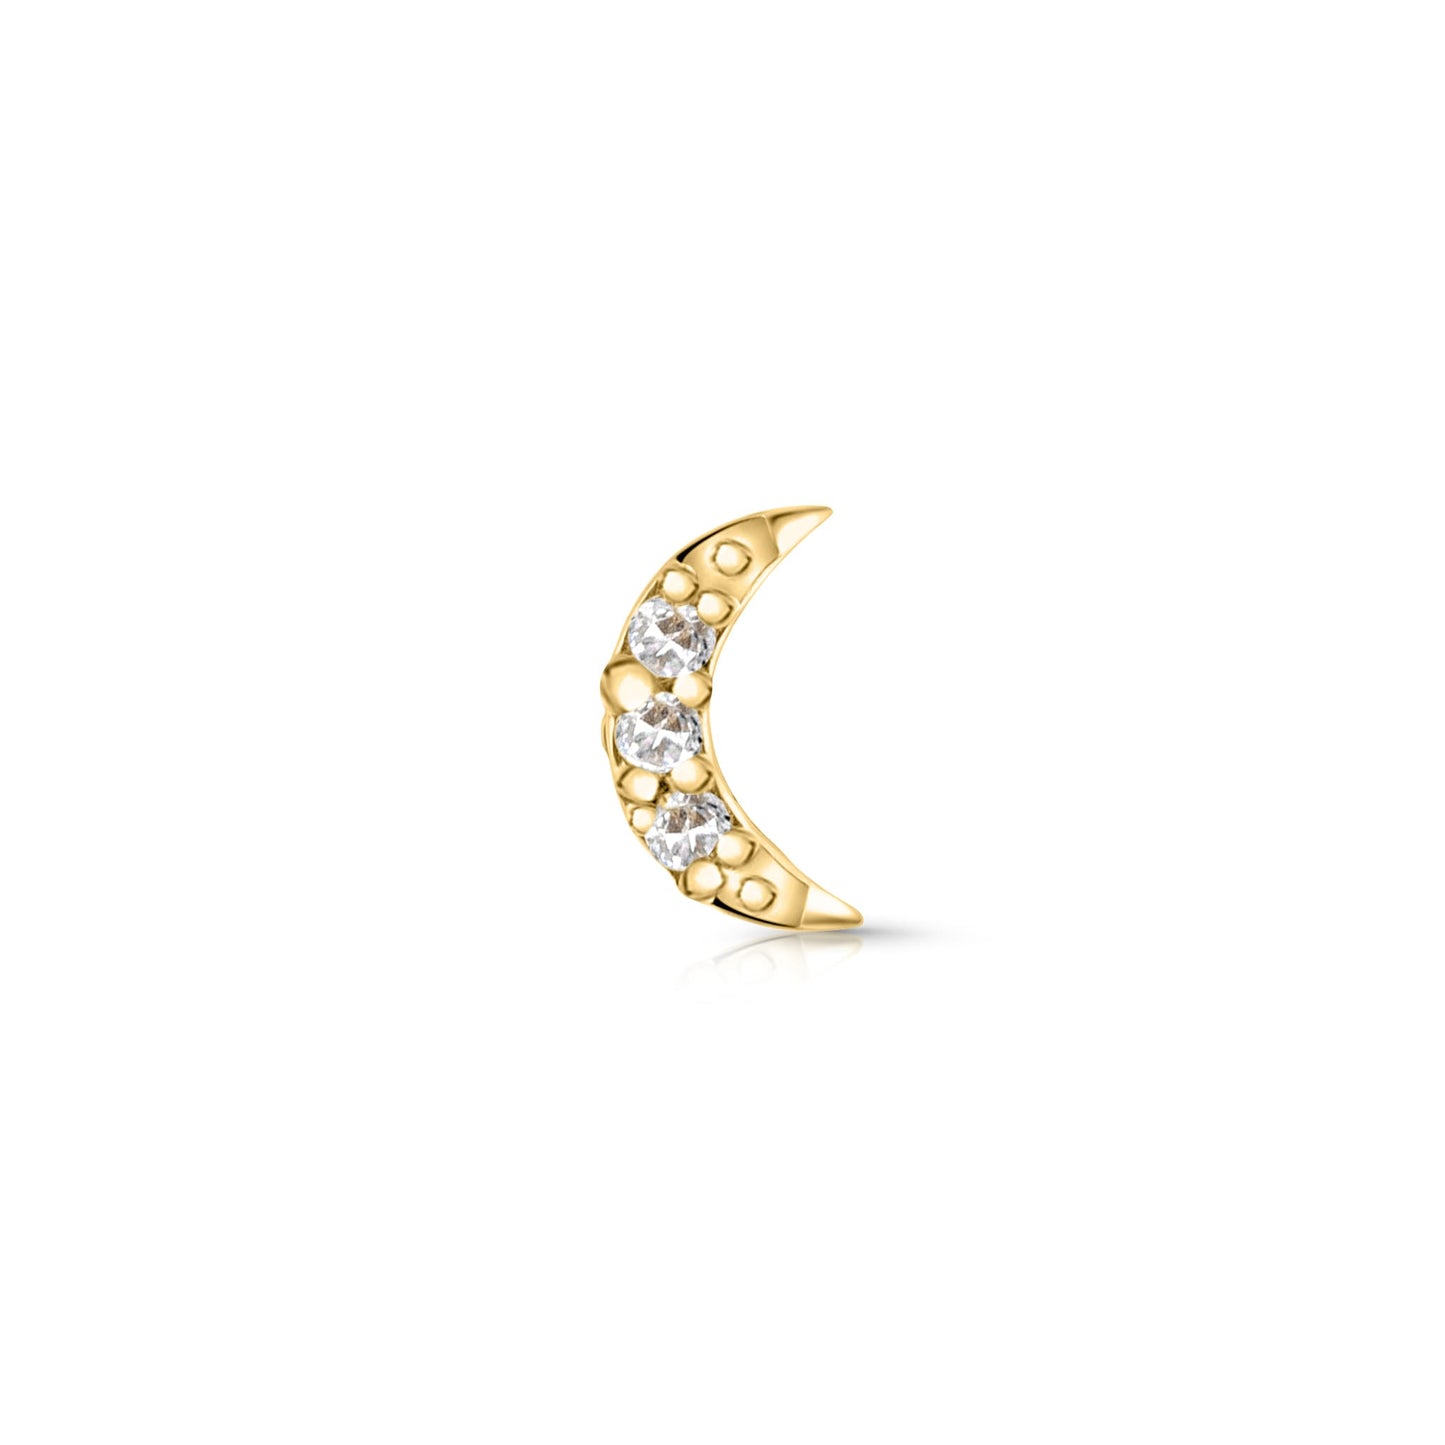 Frontal photo of Moon Earrings Gold